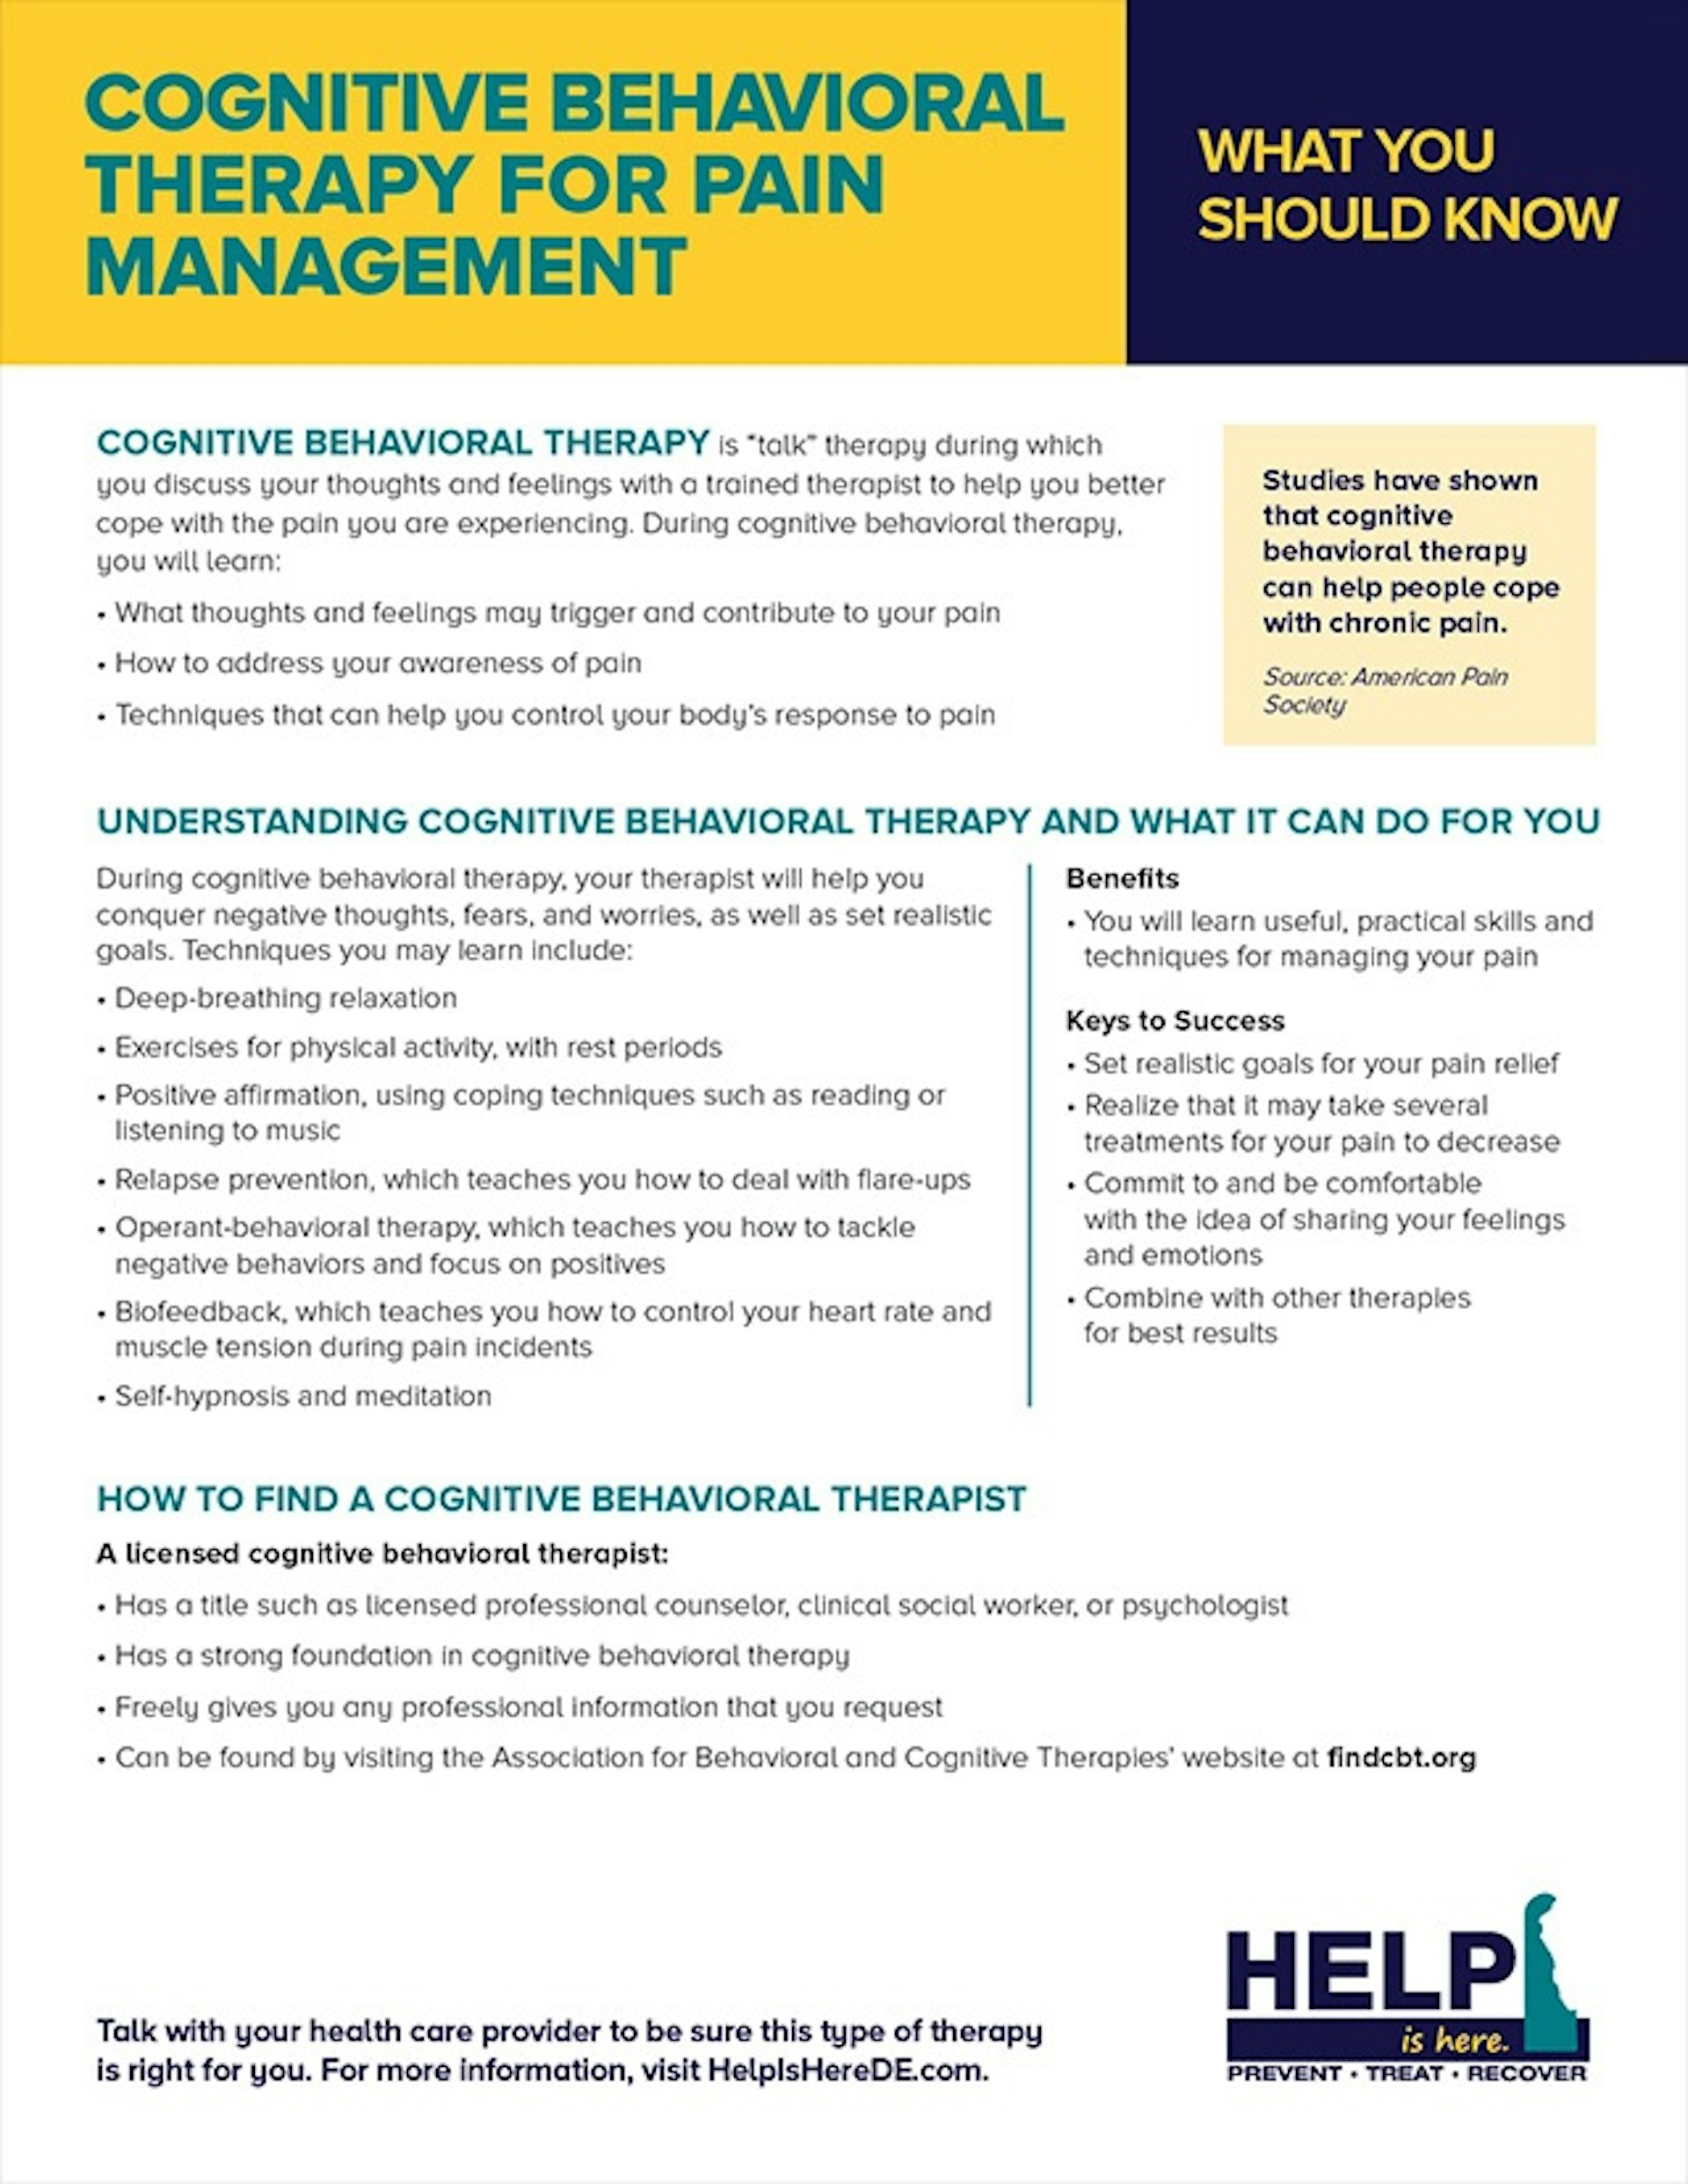 Cognitive Behavioral Therapy for Pain Management